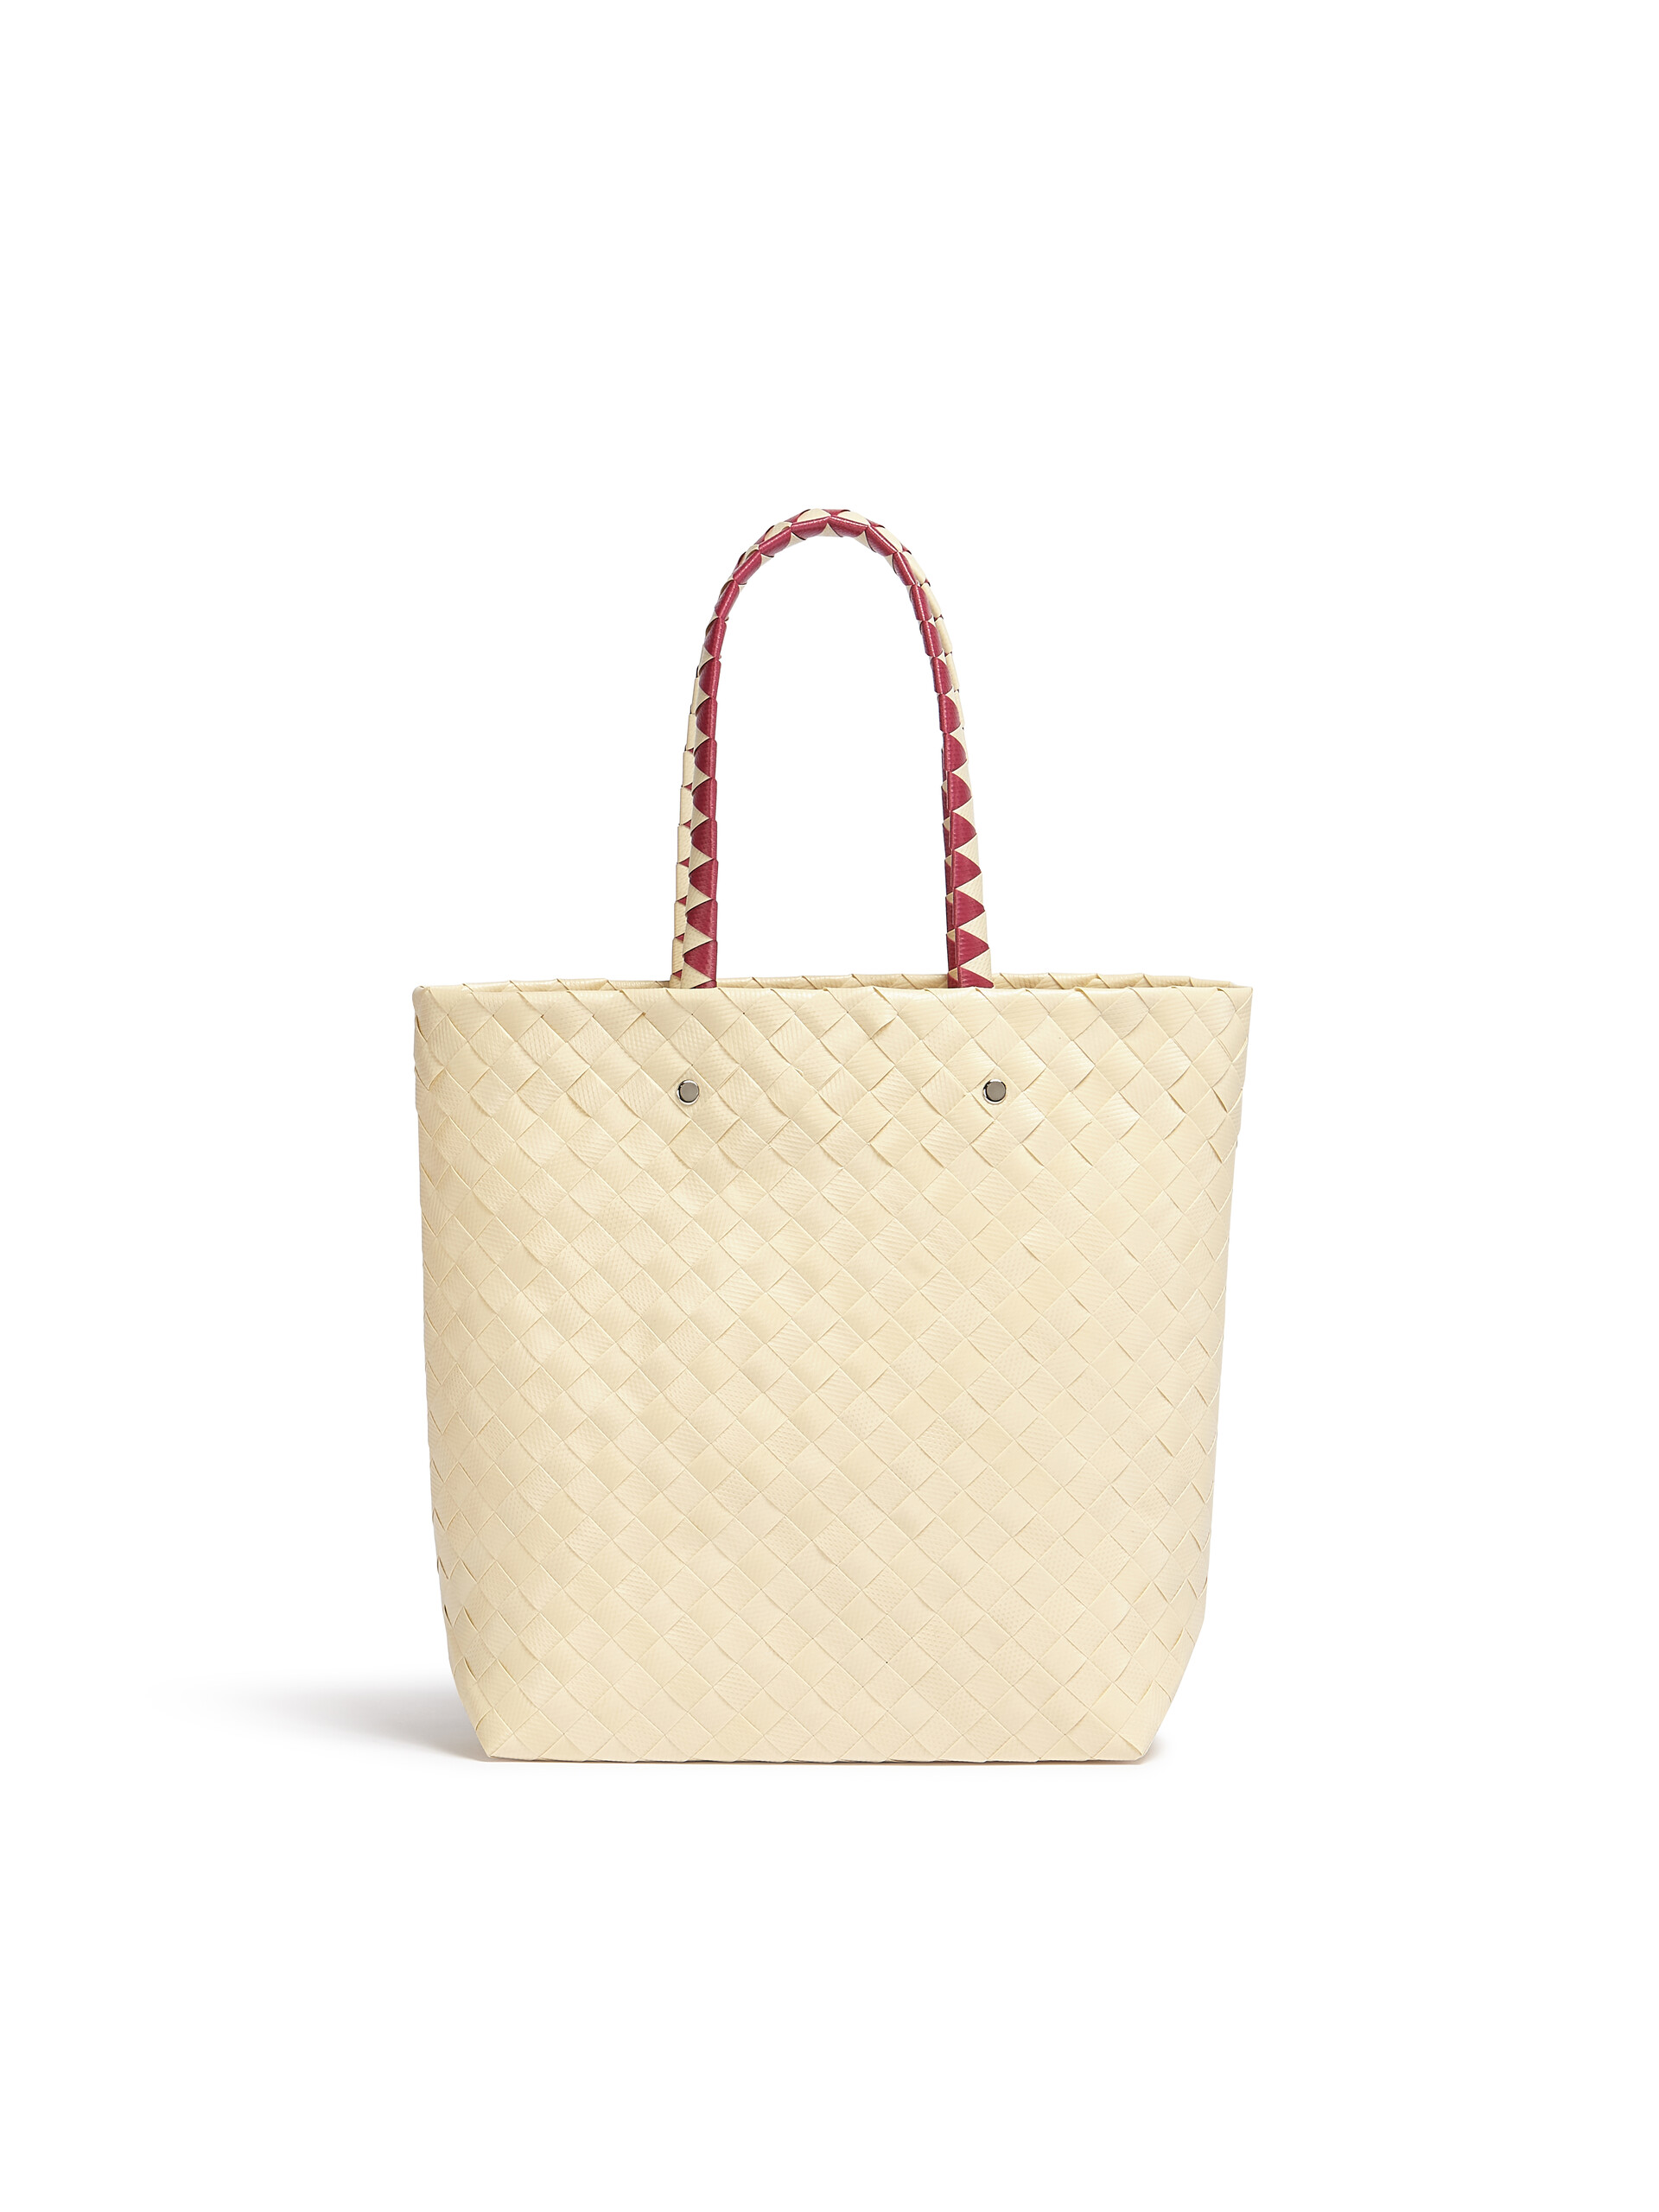 MARNI MARKET small bag in white flower motif - Bags - Image 3